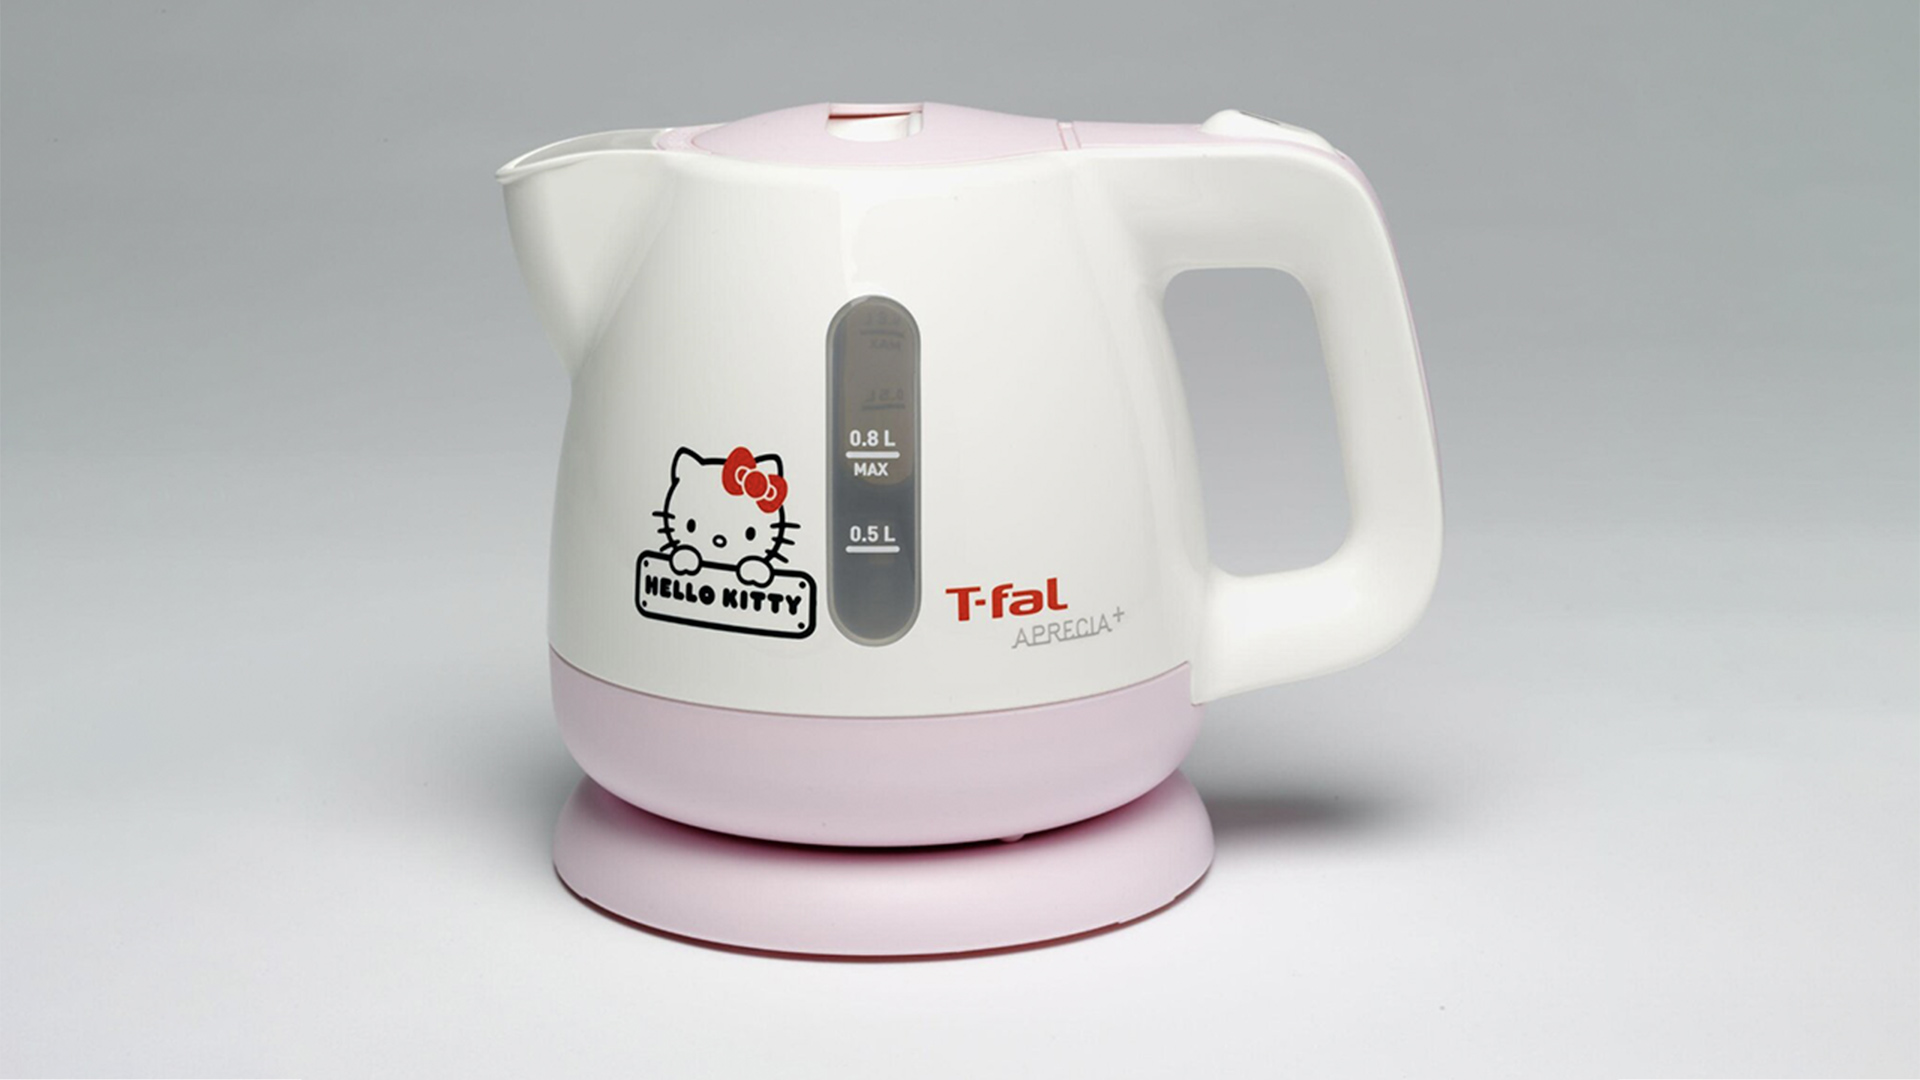 Pink and white plastic Hello Kitty kettle